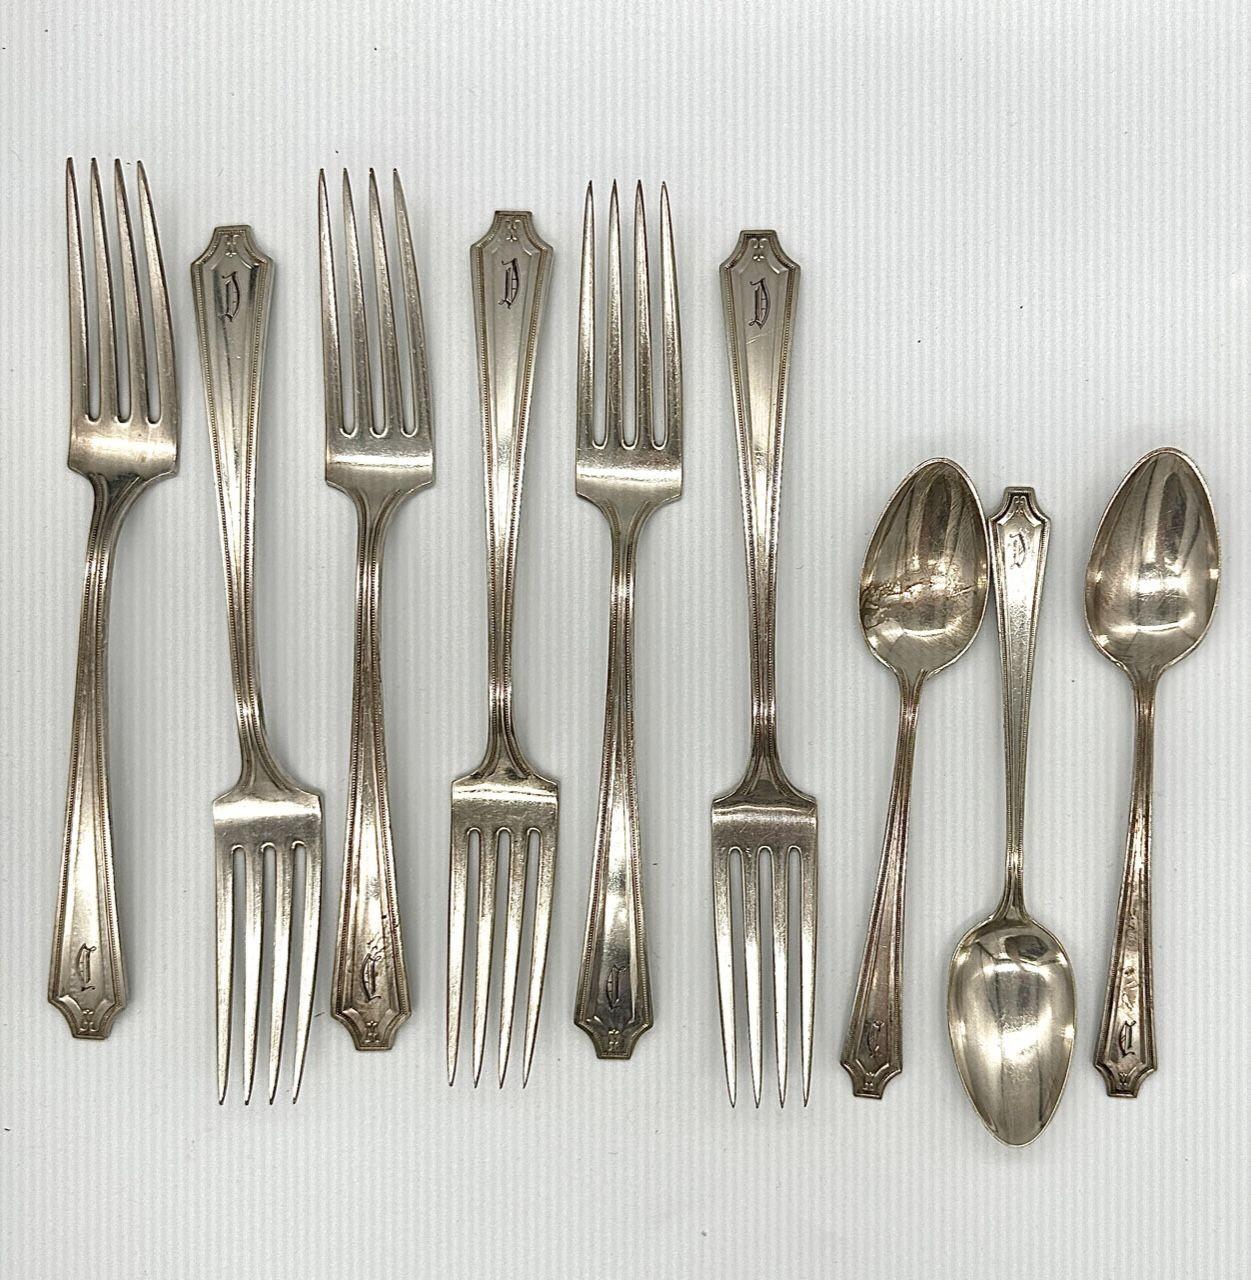 American Old French King Albert Sterling Silverware Set of 15 by Whiting Manf Co For Sale